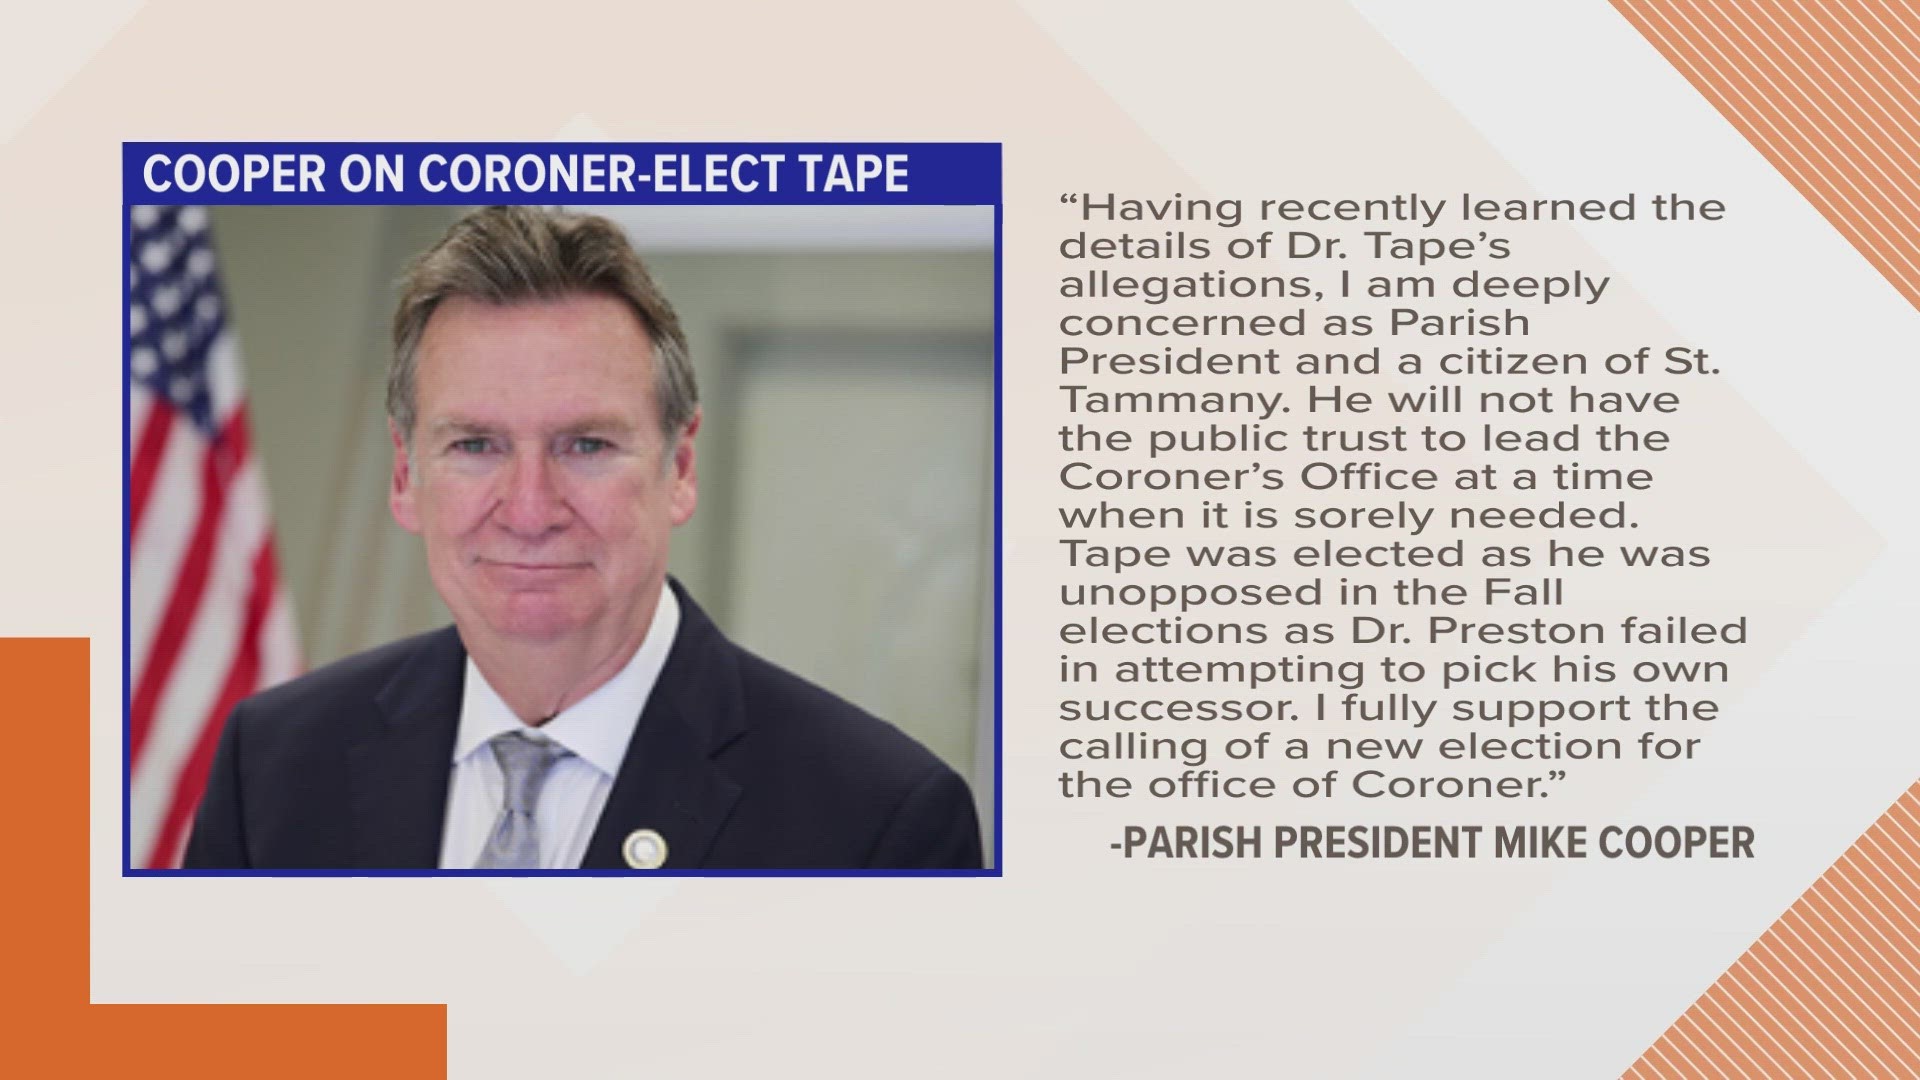 "I fully support the calling of a new election," President Mike Cooper said Friday after a council unanimously urged Christopher Tape to step down as coroner-elect.